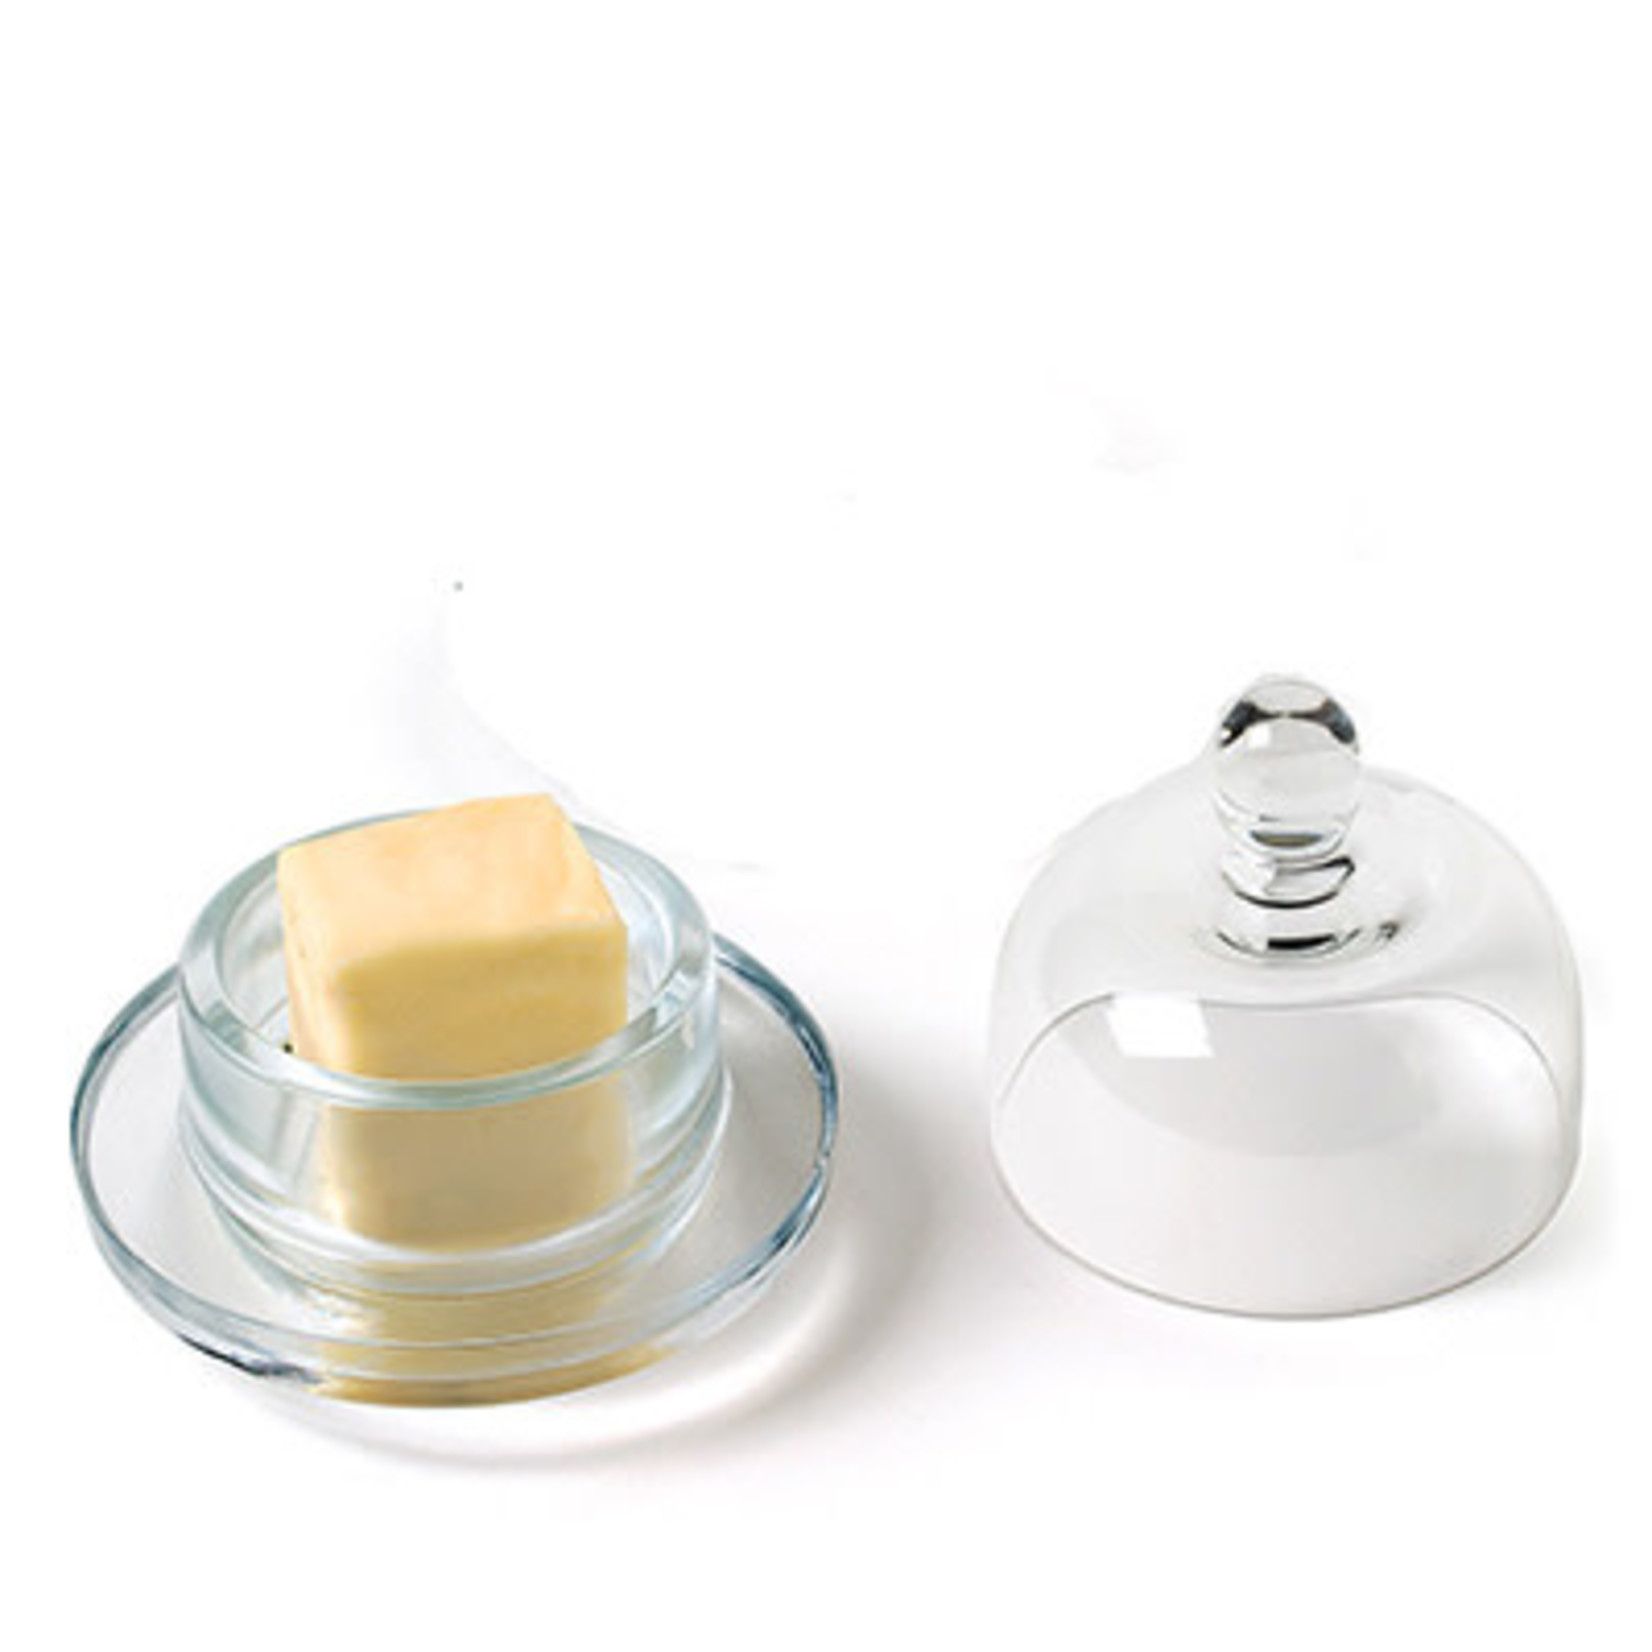 Glass dome - 2 pc Butter Dish